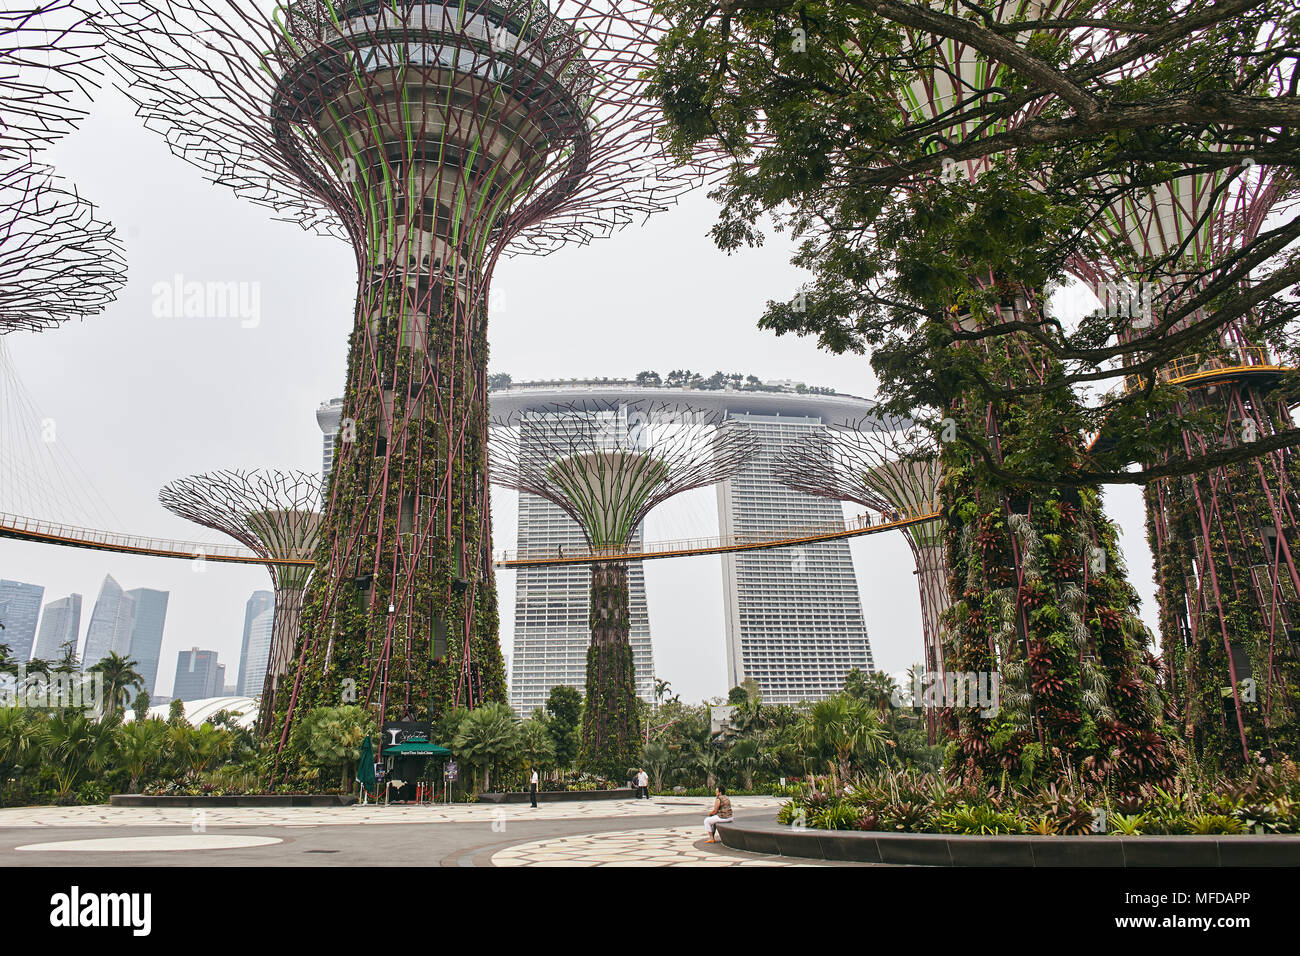 The close-up view from low angle of the Super Trees in Gardens by the Bay with some people enjoying in the park, The Marina Bay Sands in background Stock Photo